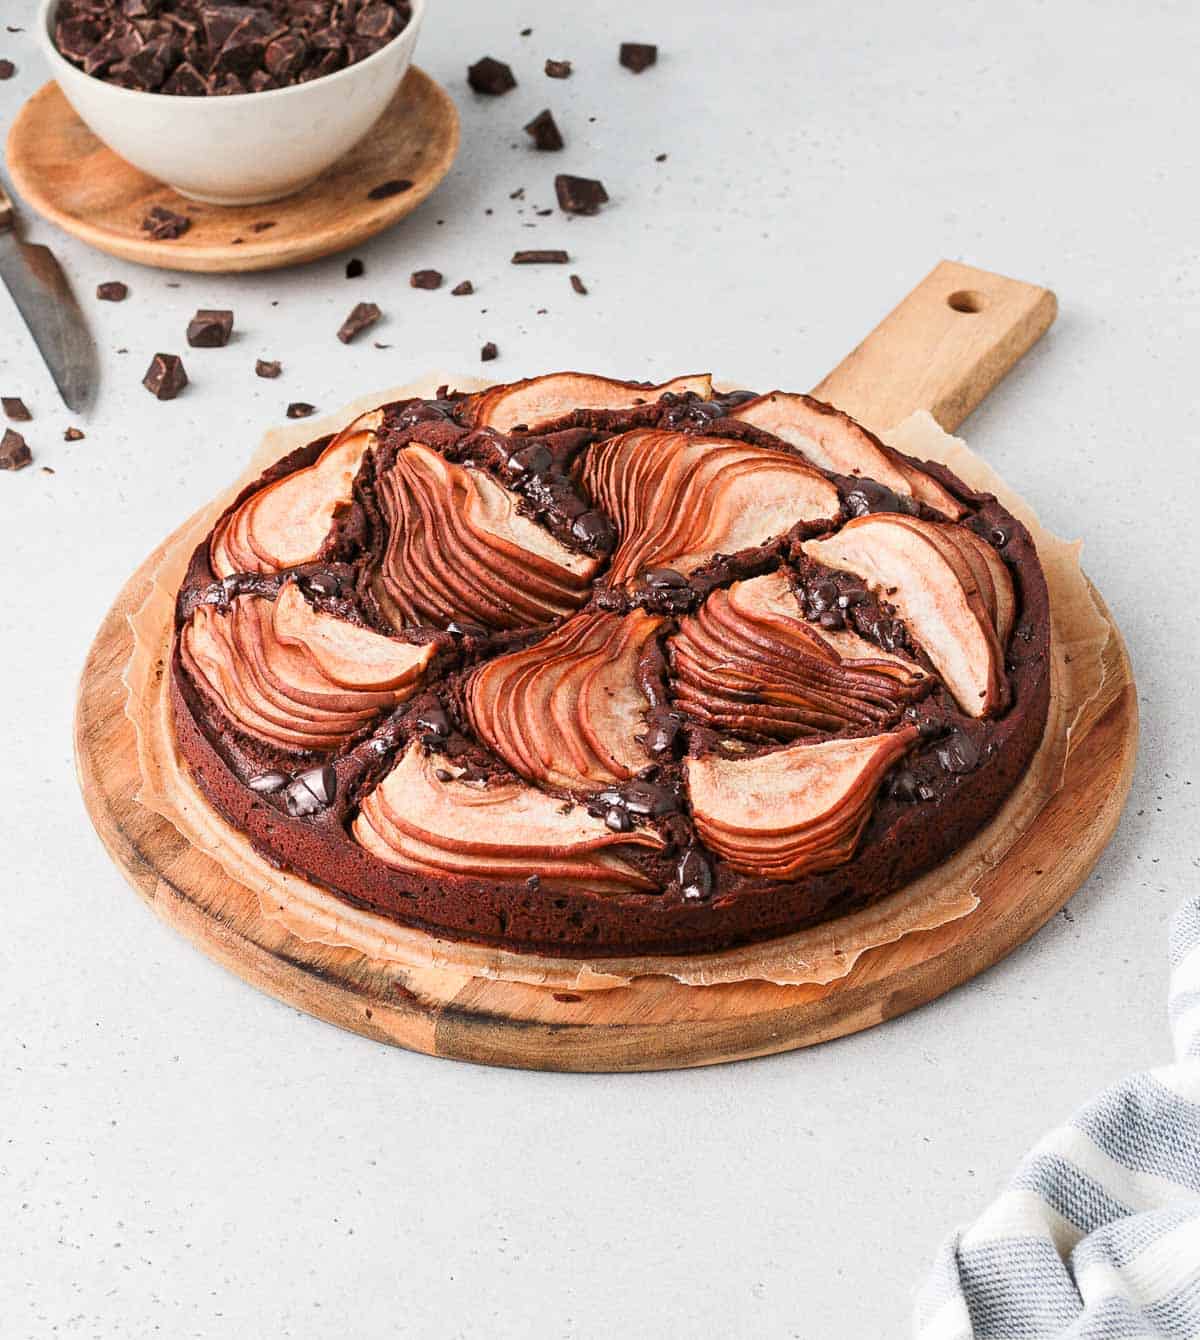 Chocolate pear cake on a round wooden board with chunks of chocolate.